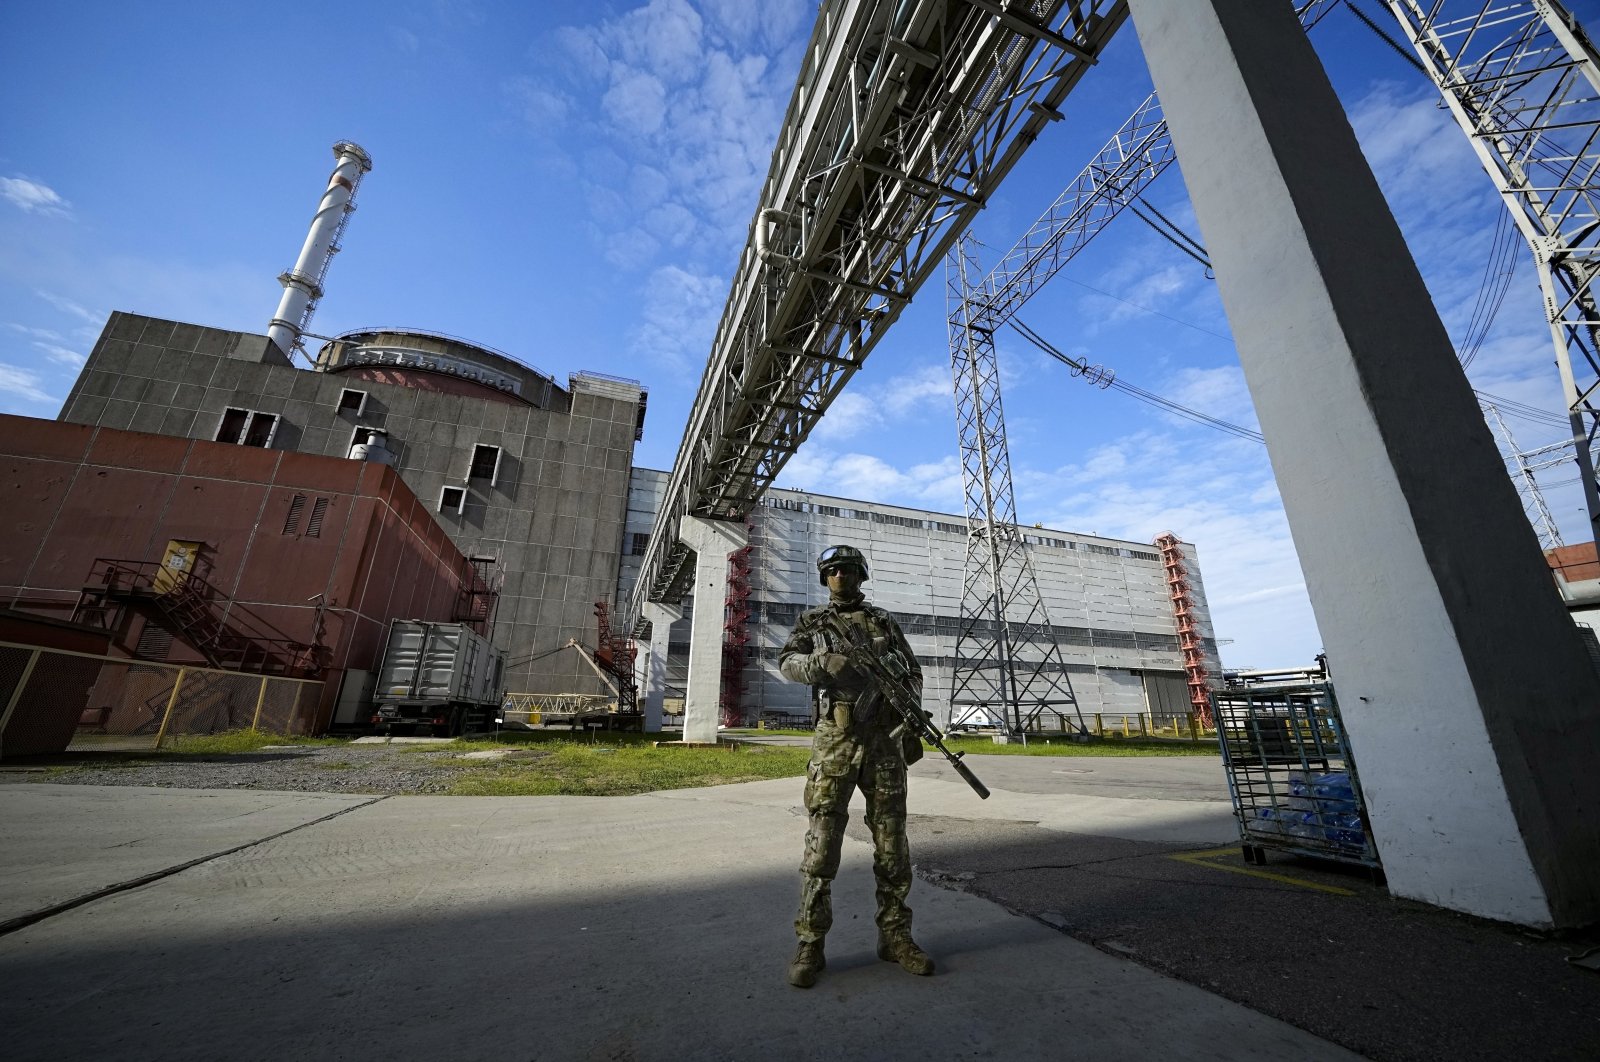 A Russian troop guards an area of the Zaporizhzhia nuclear power station in territory under Russian military control, Ukraine, May 1, 2022. (AP Photo)